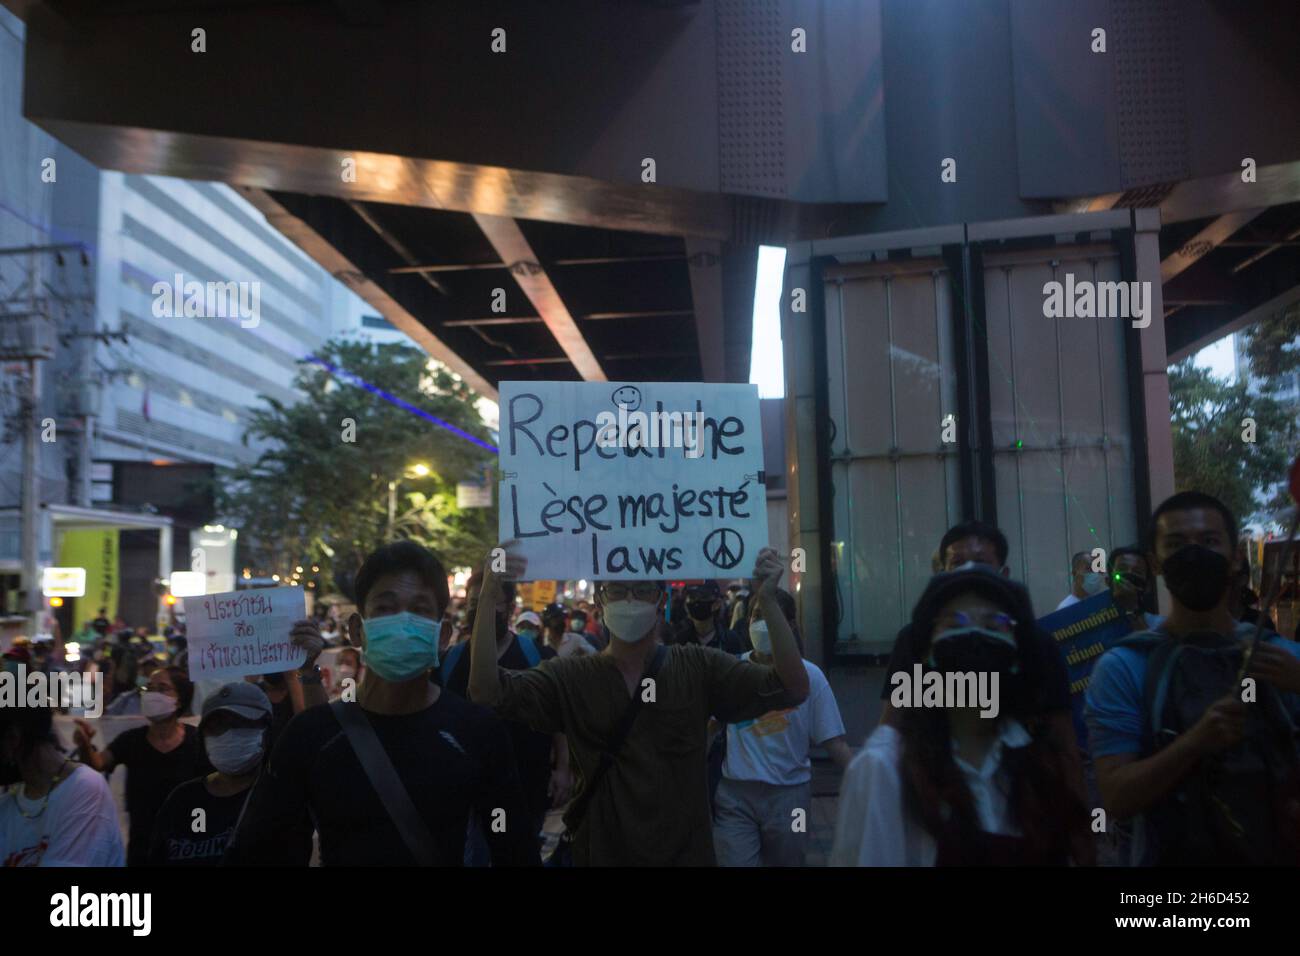 Bangkok, Thailand. 14th Nov, 2021. Demonstrators held up banners for the repeal of the lèse majesté law (Article 112). (Photo by Atiwat Silpamethanont/Pacific Press) Credit: Pacific Press Media Production Corp./Alamy Live News Stock Photo